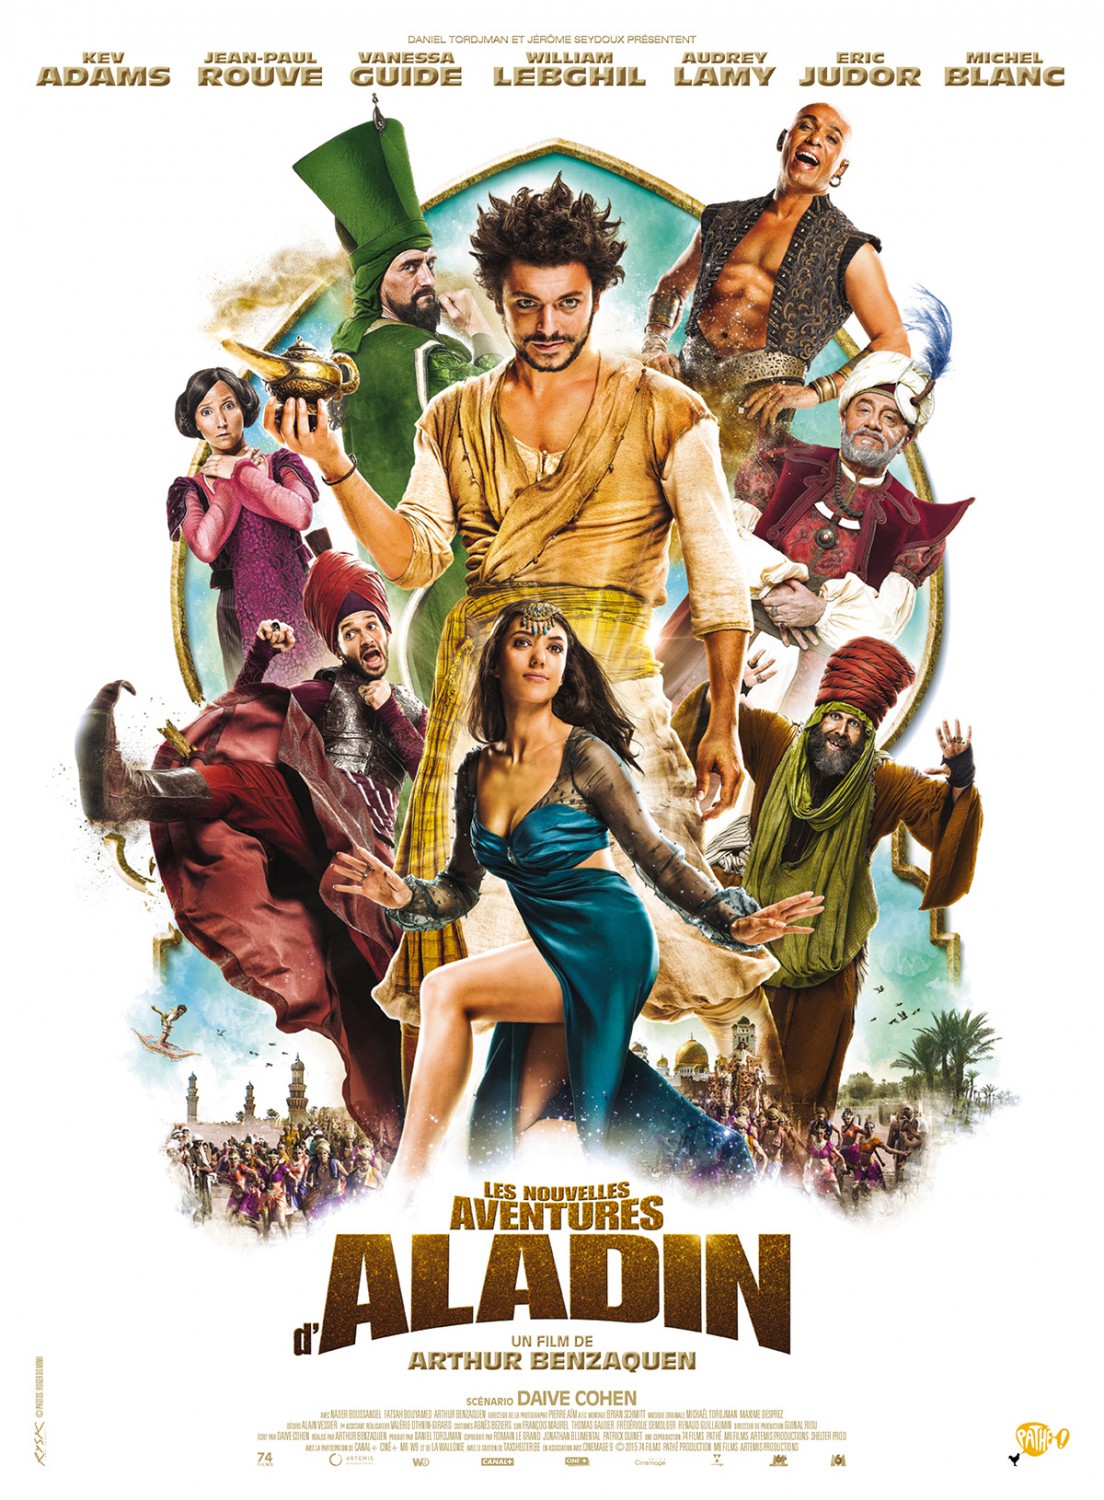 Extra Large Movie Poster Image for Les nouvelles aventures d'Aladin 